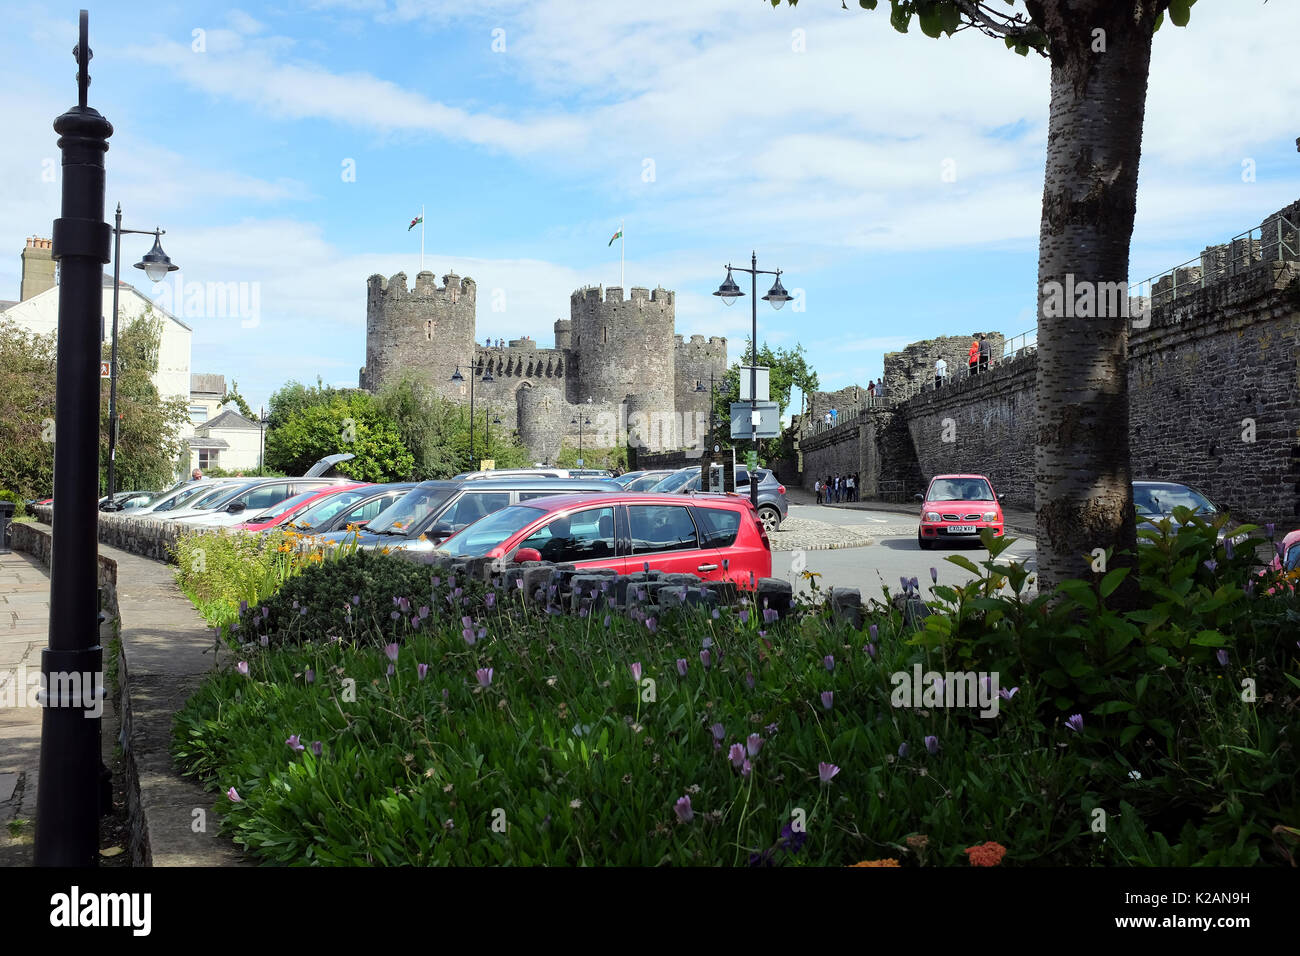 Conwy, Wales, UK. July 31, 2017. Conwy castle from inside the town wall with tourists walking the walls at Conwy in Wales. Stock Photo